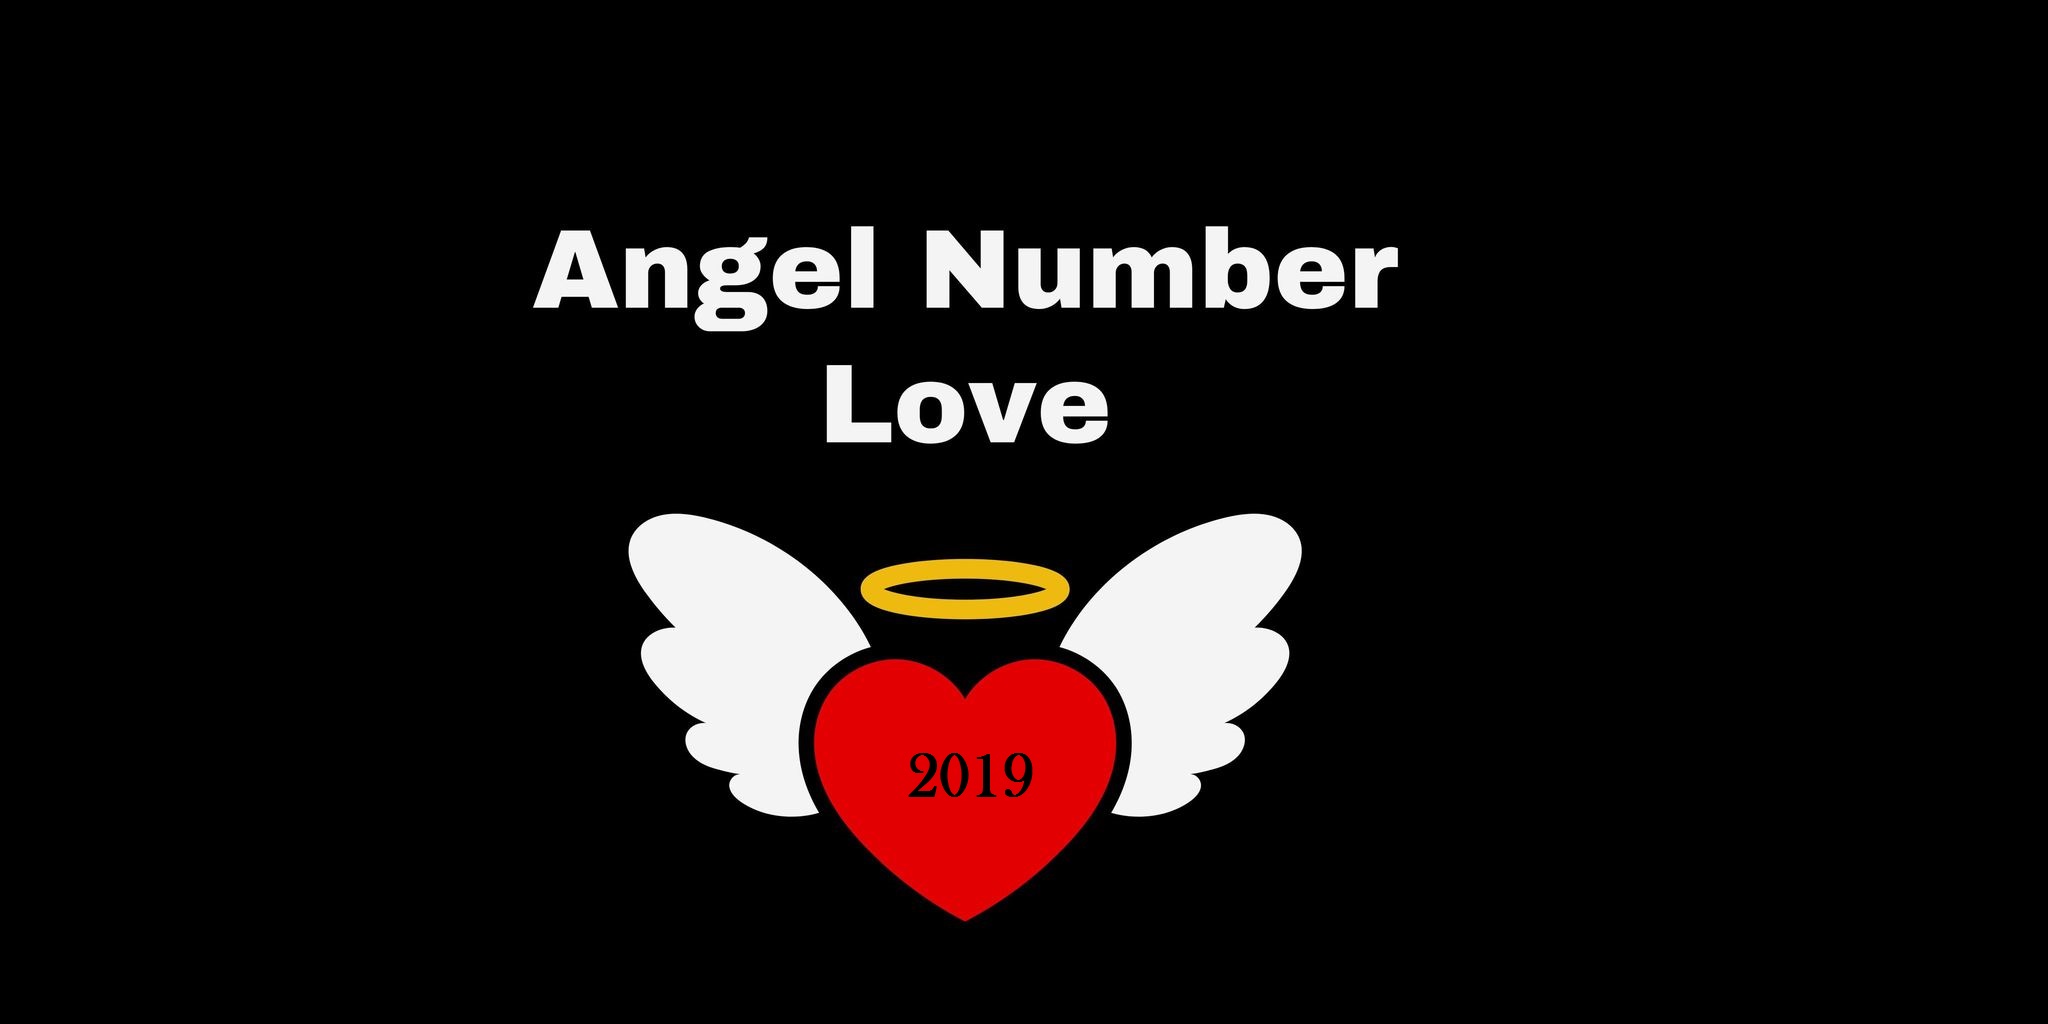 2019 Angel Number Meaning In Love